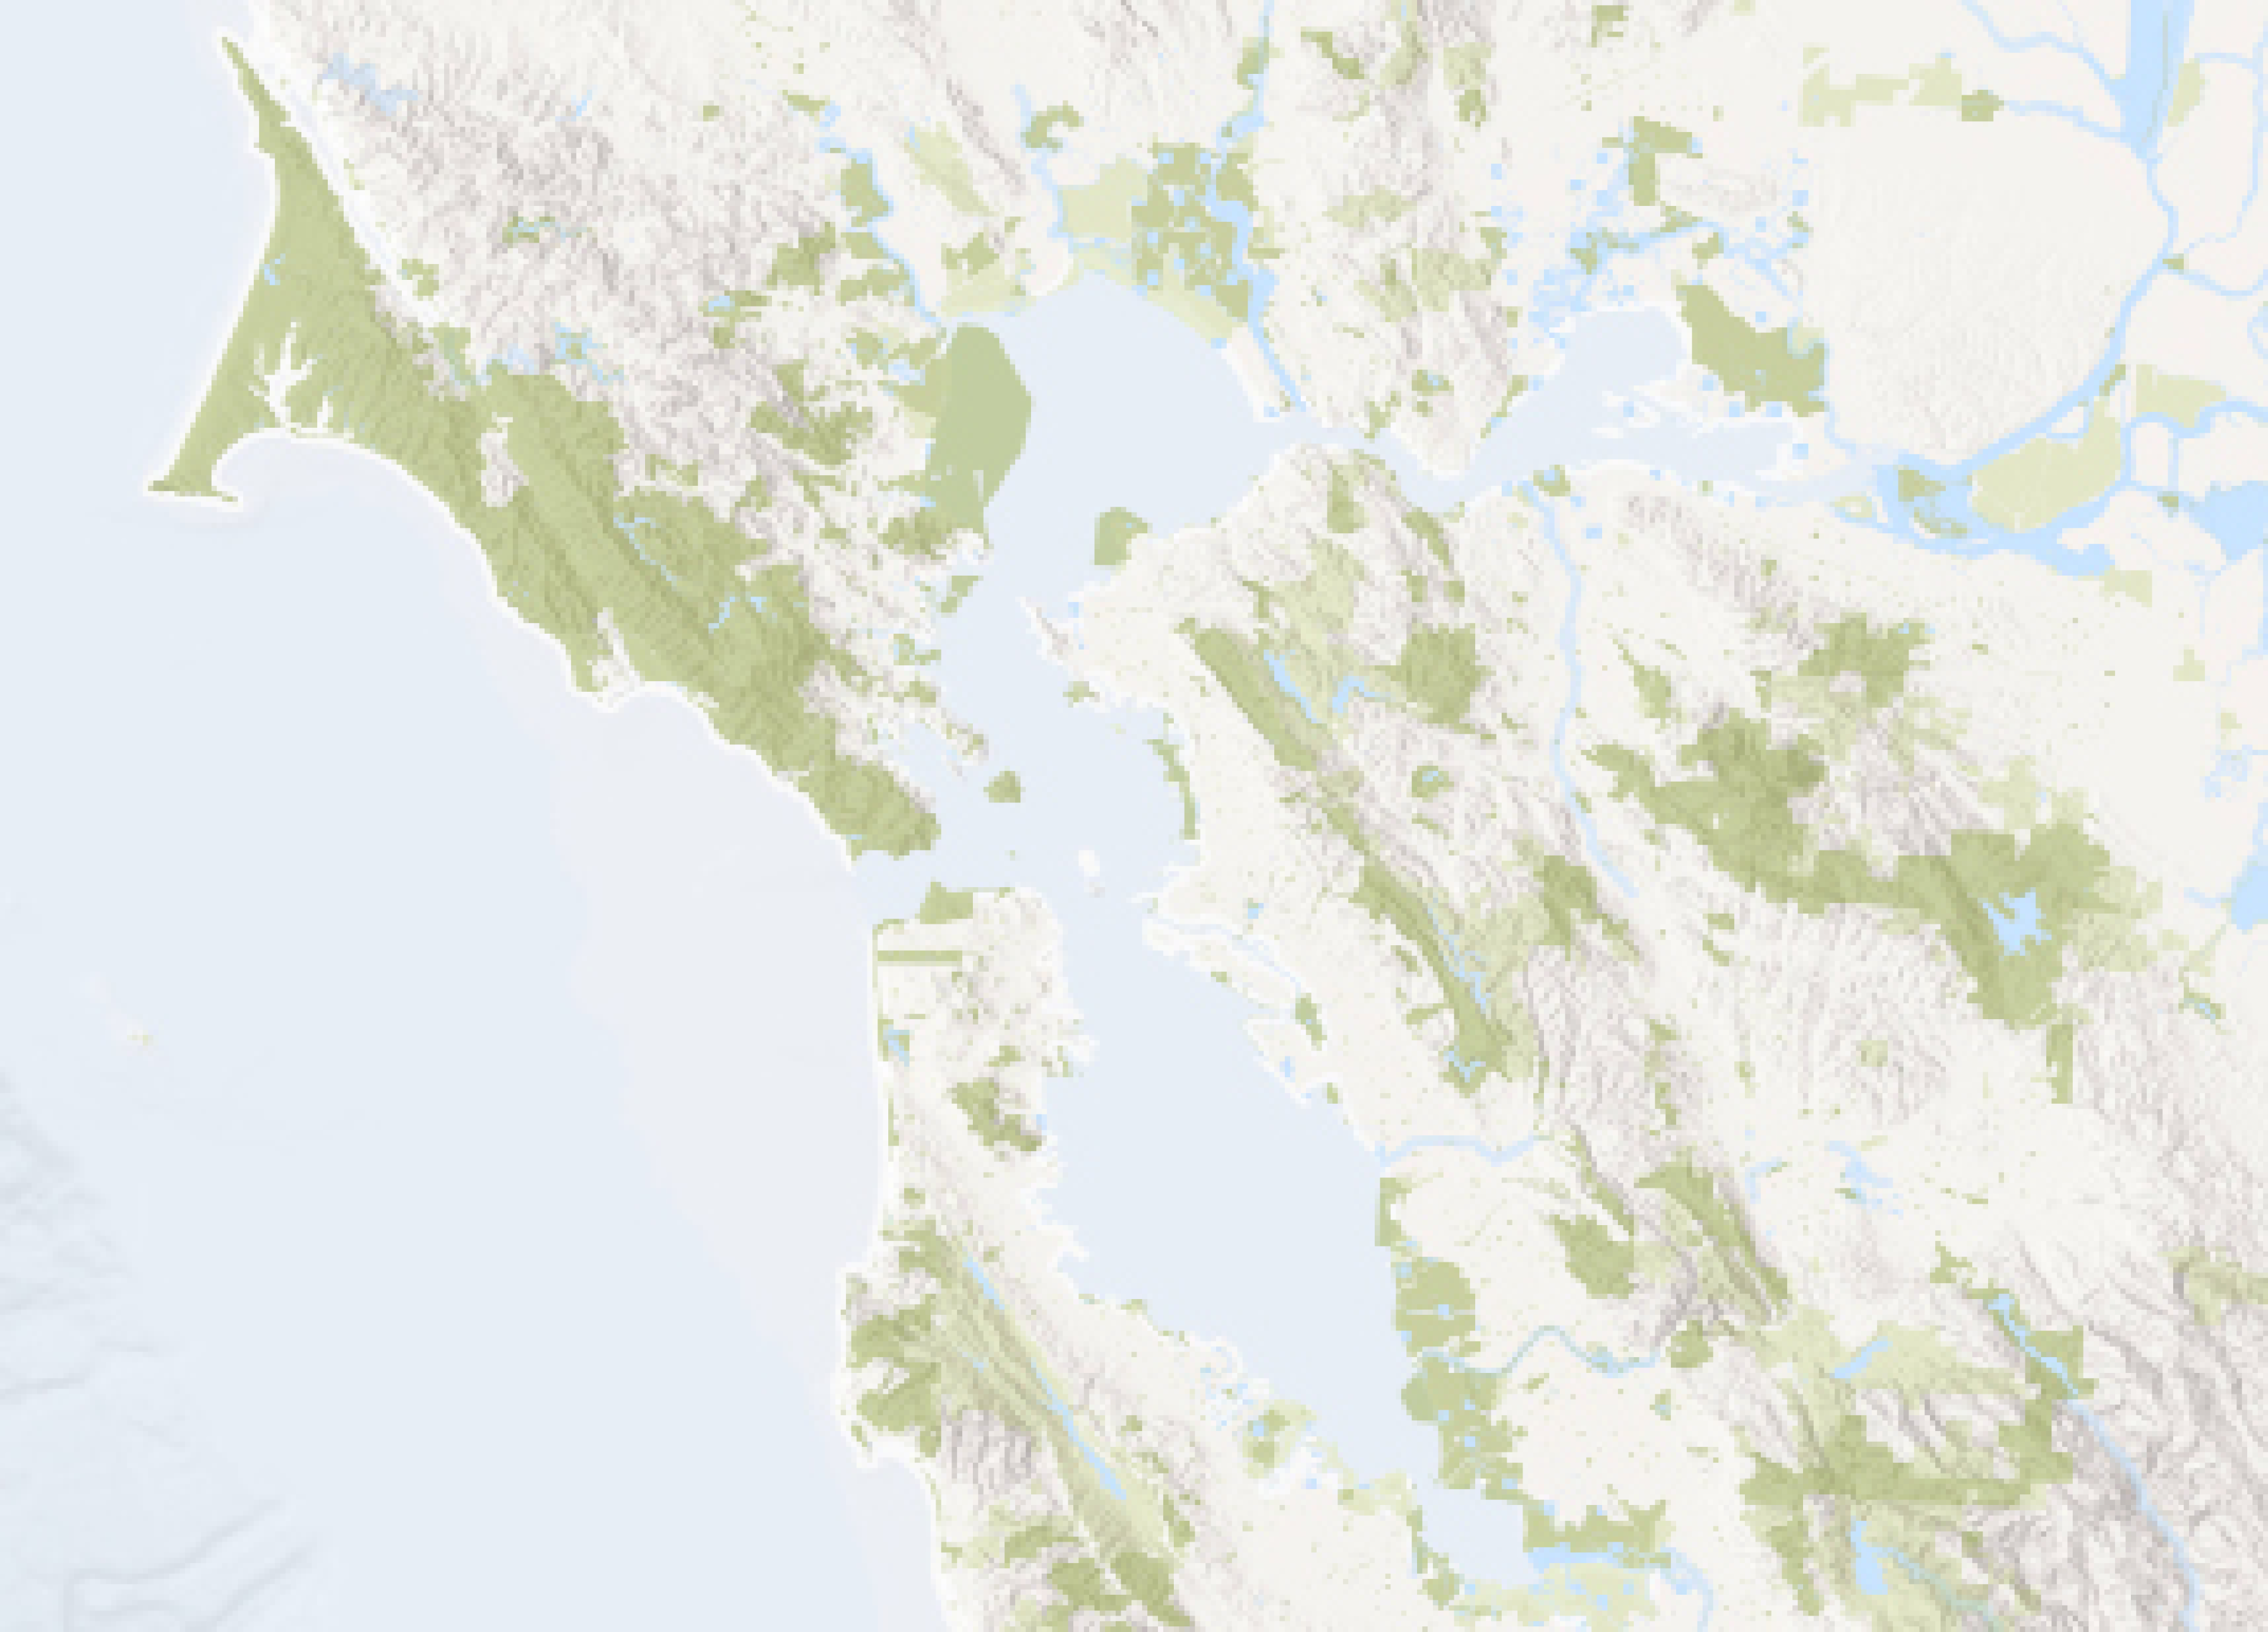 Geographic map of California's Bay area with open space areas highlighted